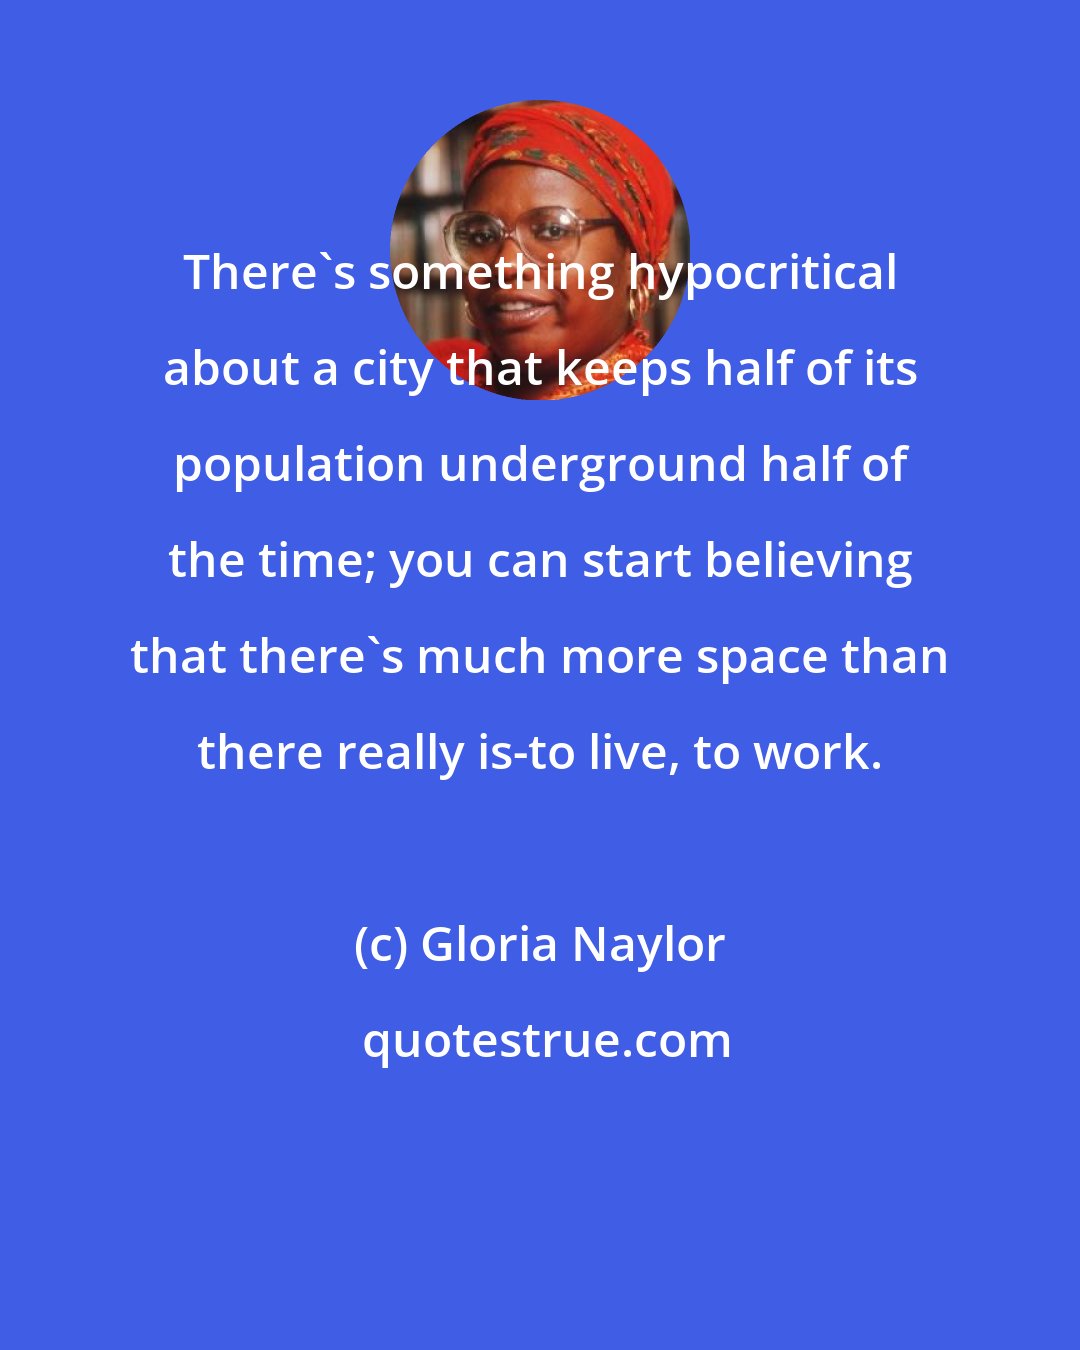 Gloria Naylor: There's something hypocritical about a city that keeps half of its population underground half of the time; you can start believing that there's much more space than there really is-to live, to work.